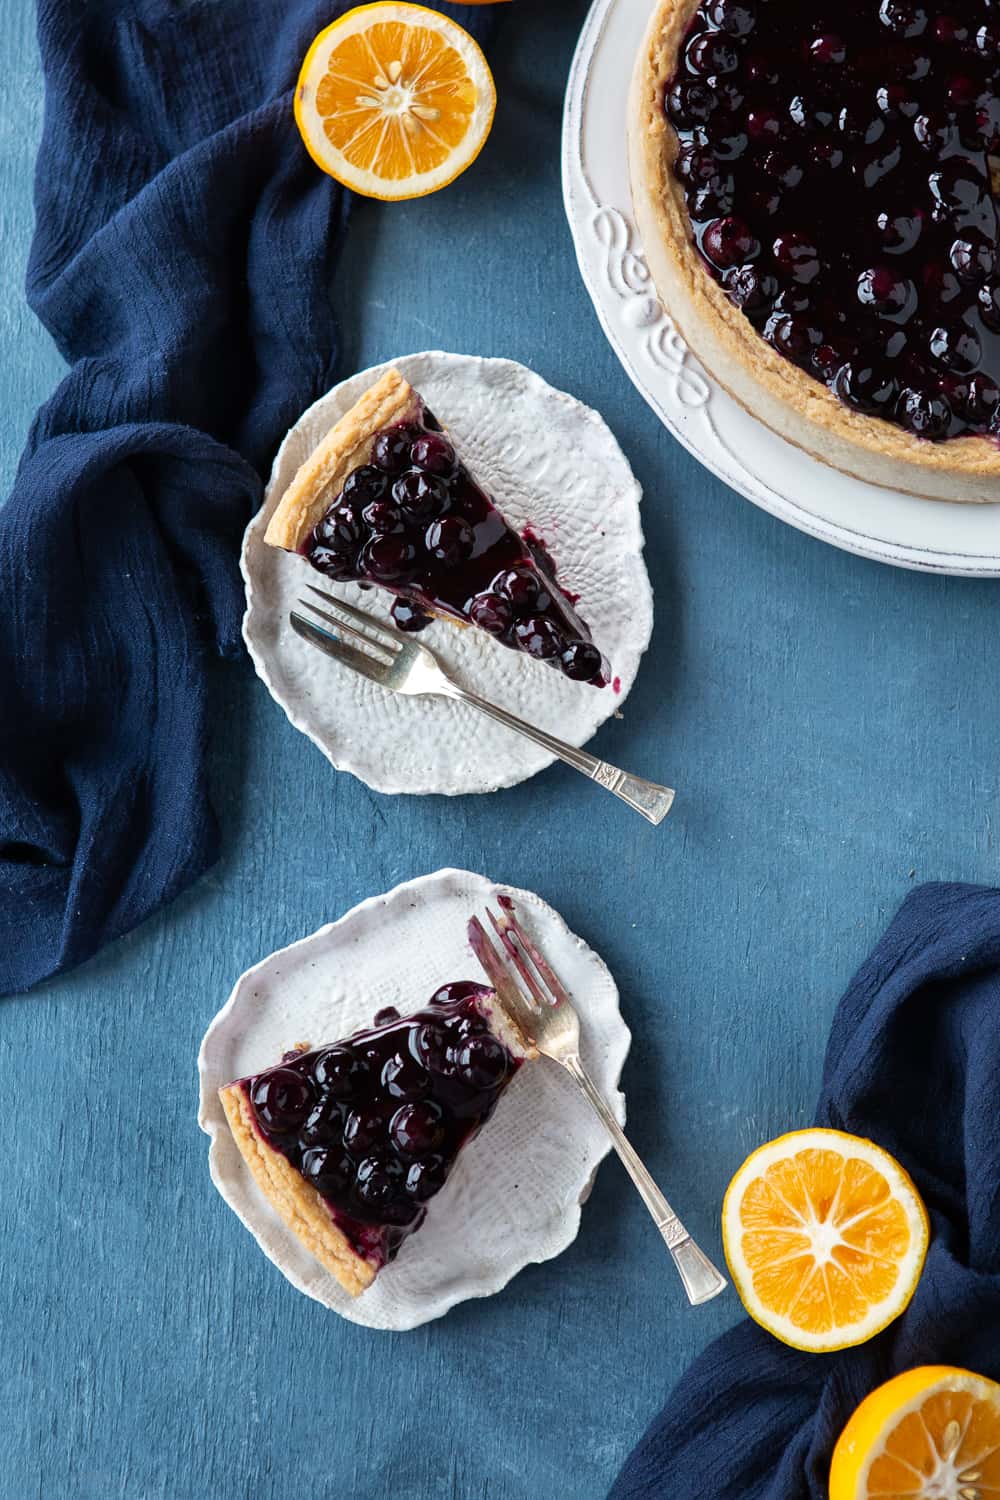 Baked Vegan Blueberry Cheesecake two slices shot from above